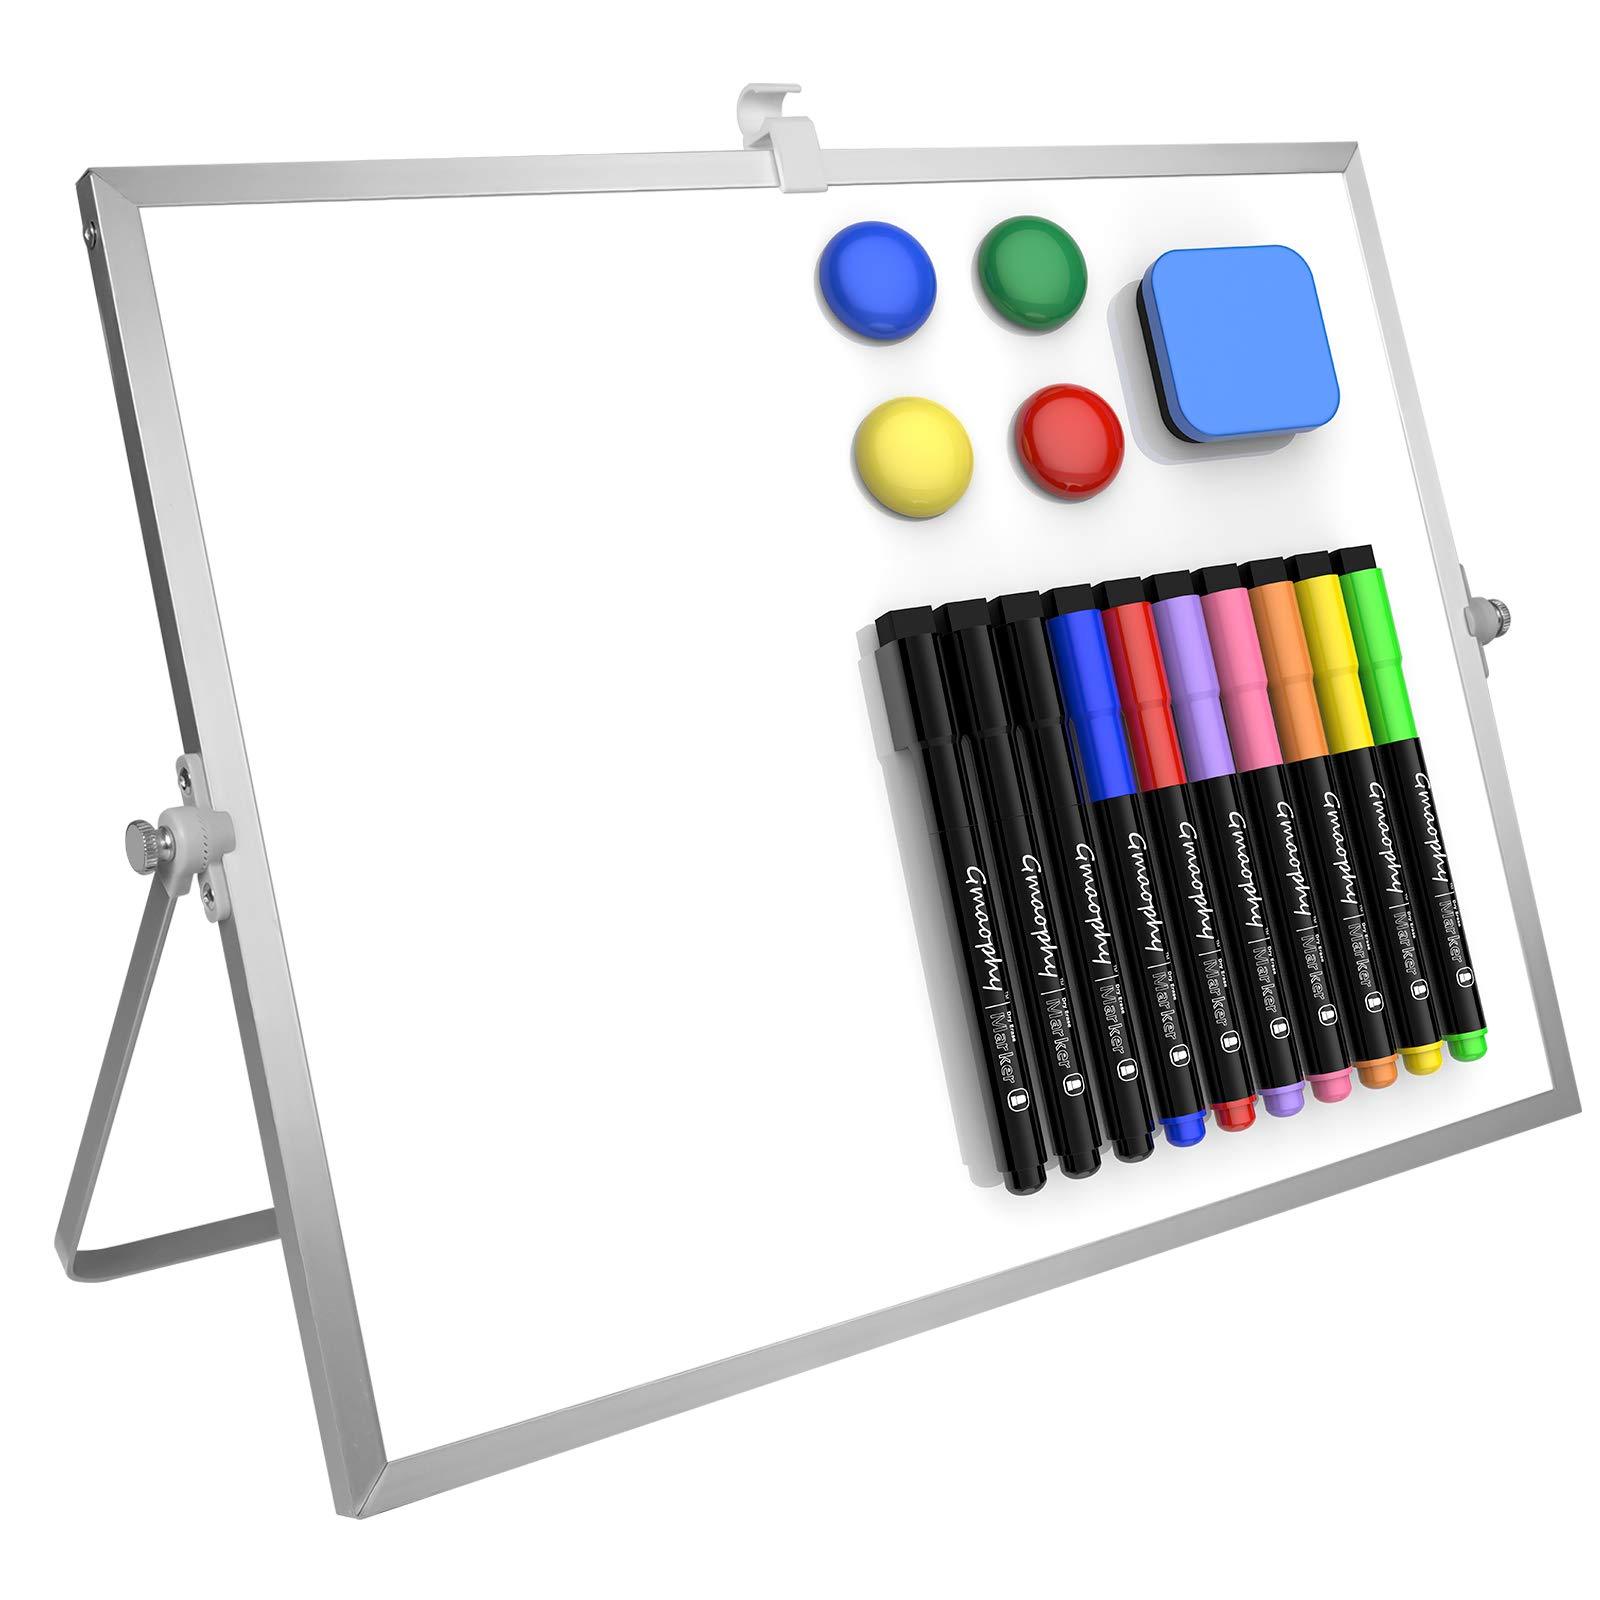 Dry Erase White Board- 16X12 Large Magnetic Desktop Whiteboard with  Stand, 10 Markers, 4 Magnets, 1 Eraser- Portable Double-Sided White Board  Easel for Kids/Drawing/Memo/to Do 